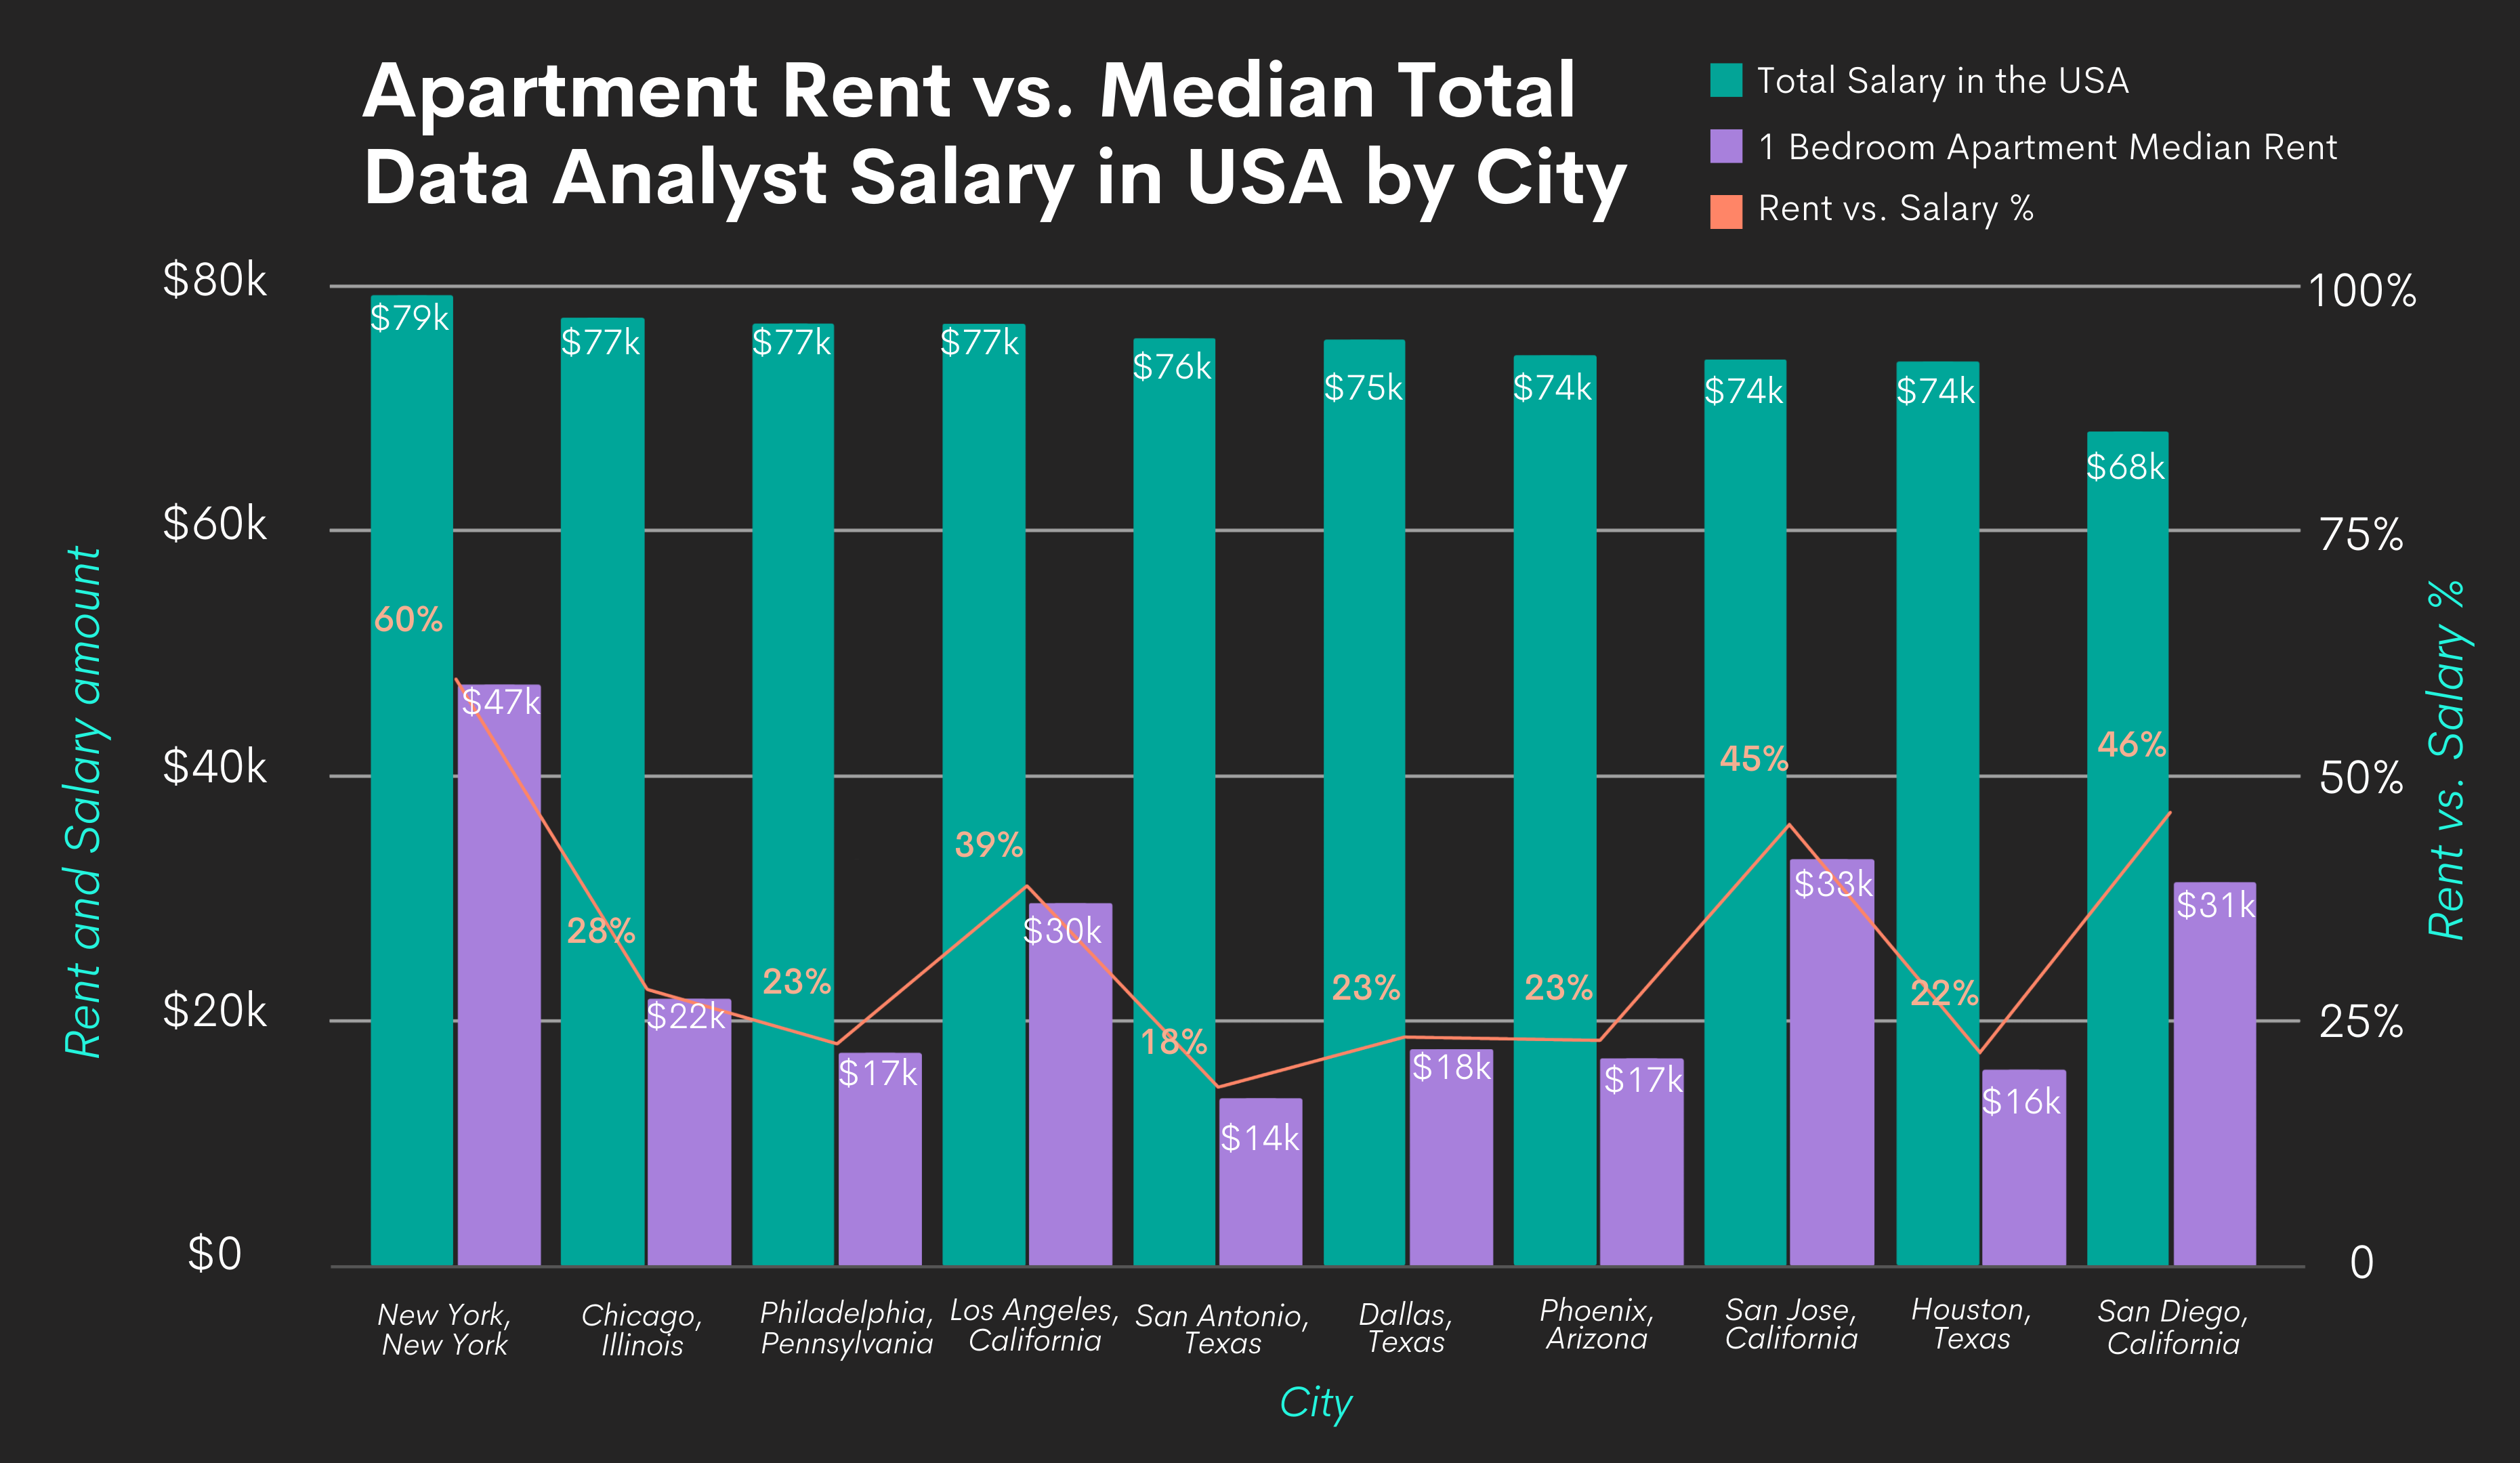 Data Analyst Salary in USA by City